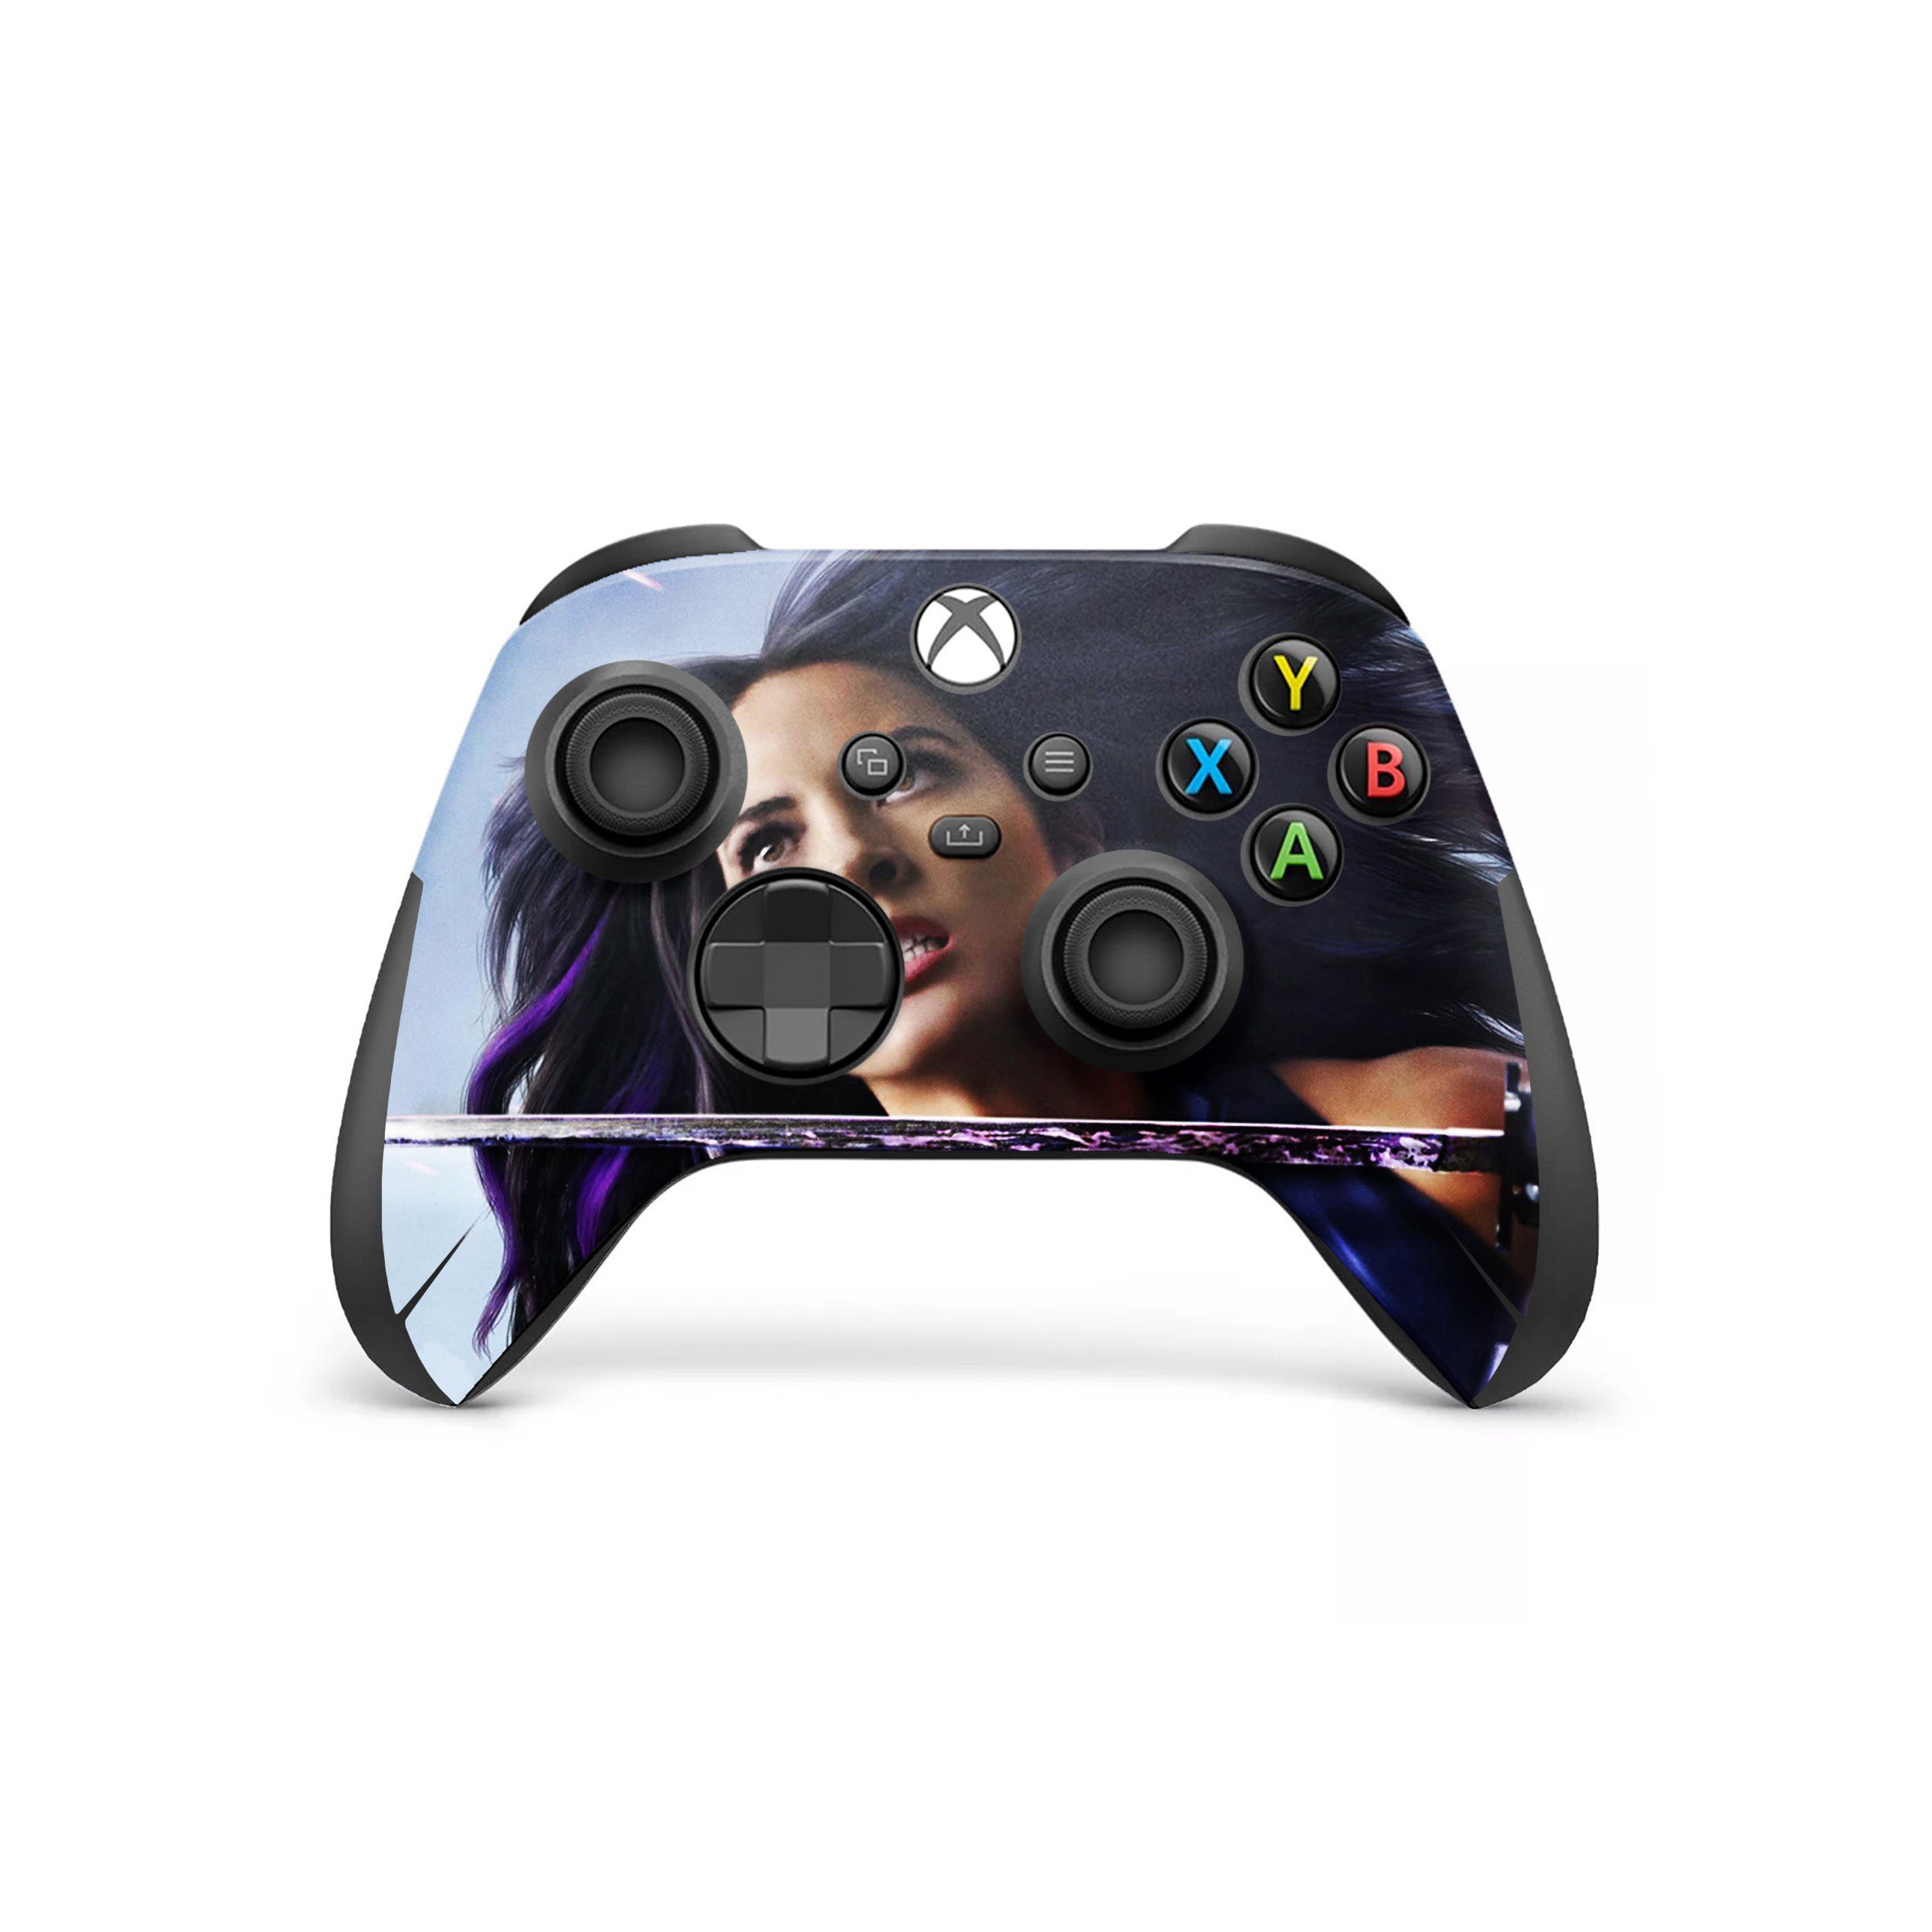 A video game skin featuring a Marvel X Men Psylocke design for the Xbox Wireless Controller.